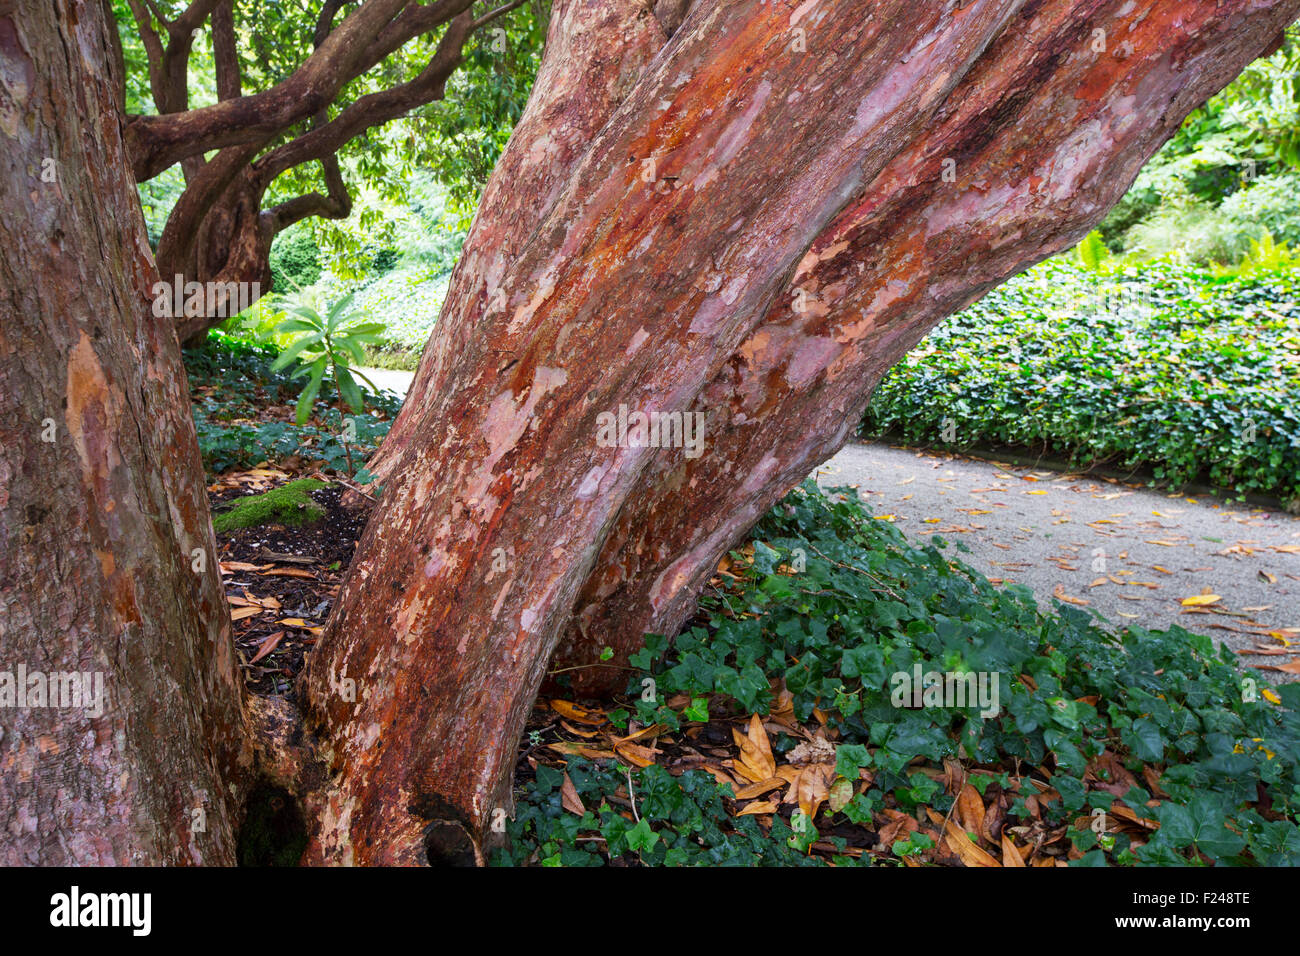 A Rhododendron tree in Trelissick Gardens near Falmouth, Cornwall, UK. Stock Photo